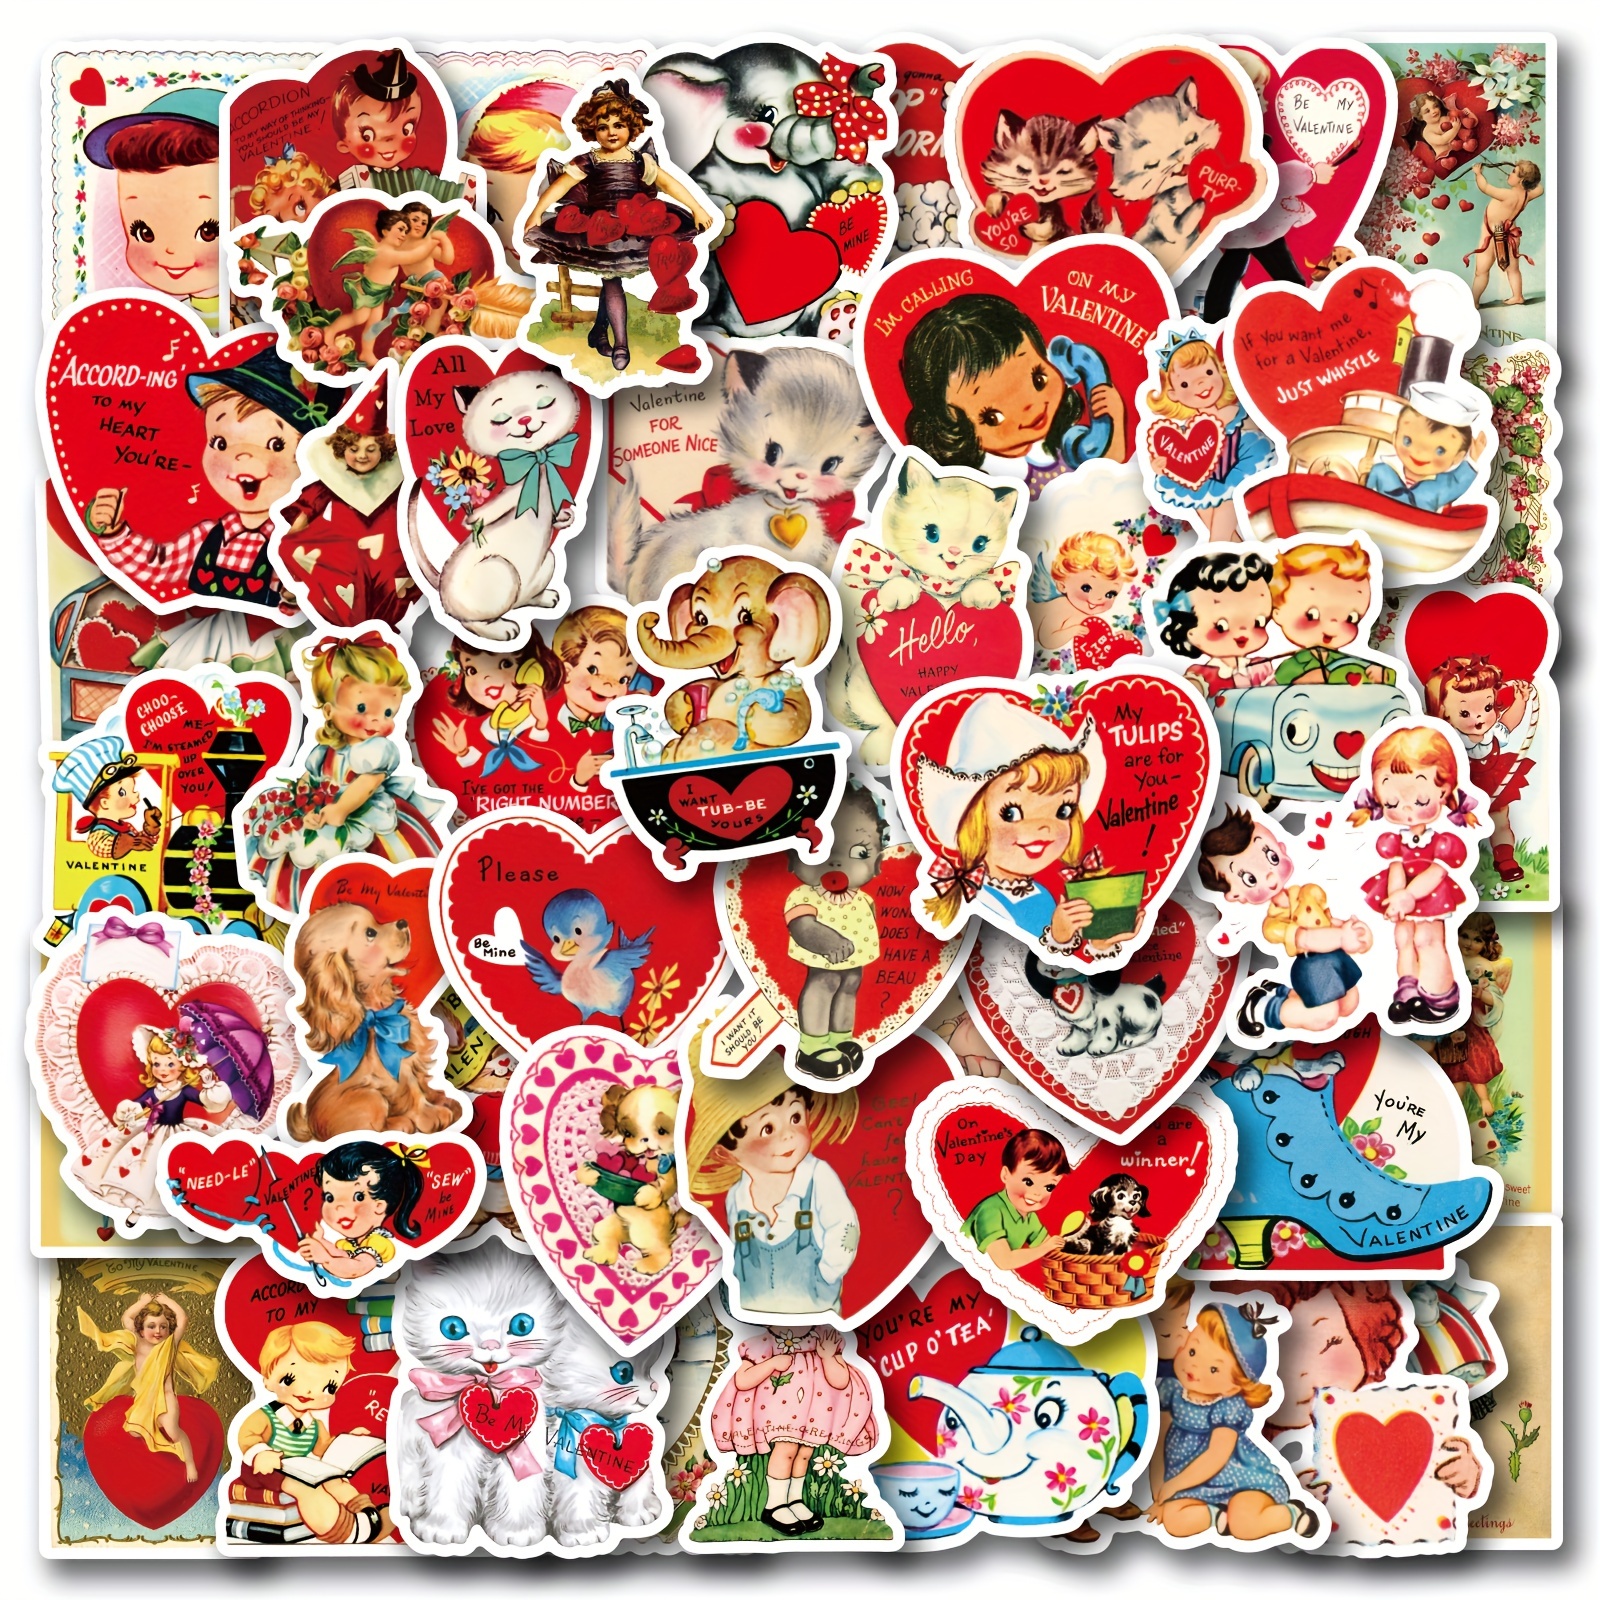 Lucleag Valentine’s Day Stickers for Kids, Romantic Valentines Day Stickers Round Happy Valentines Stickers for Gift Candy Goodie Envelope Seals